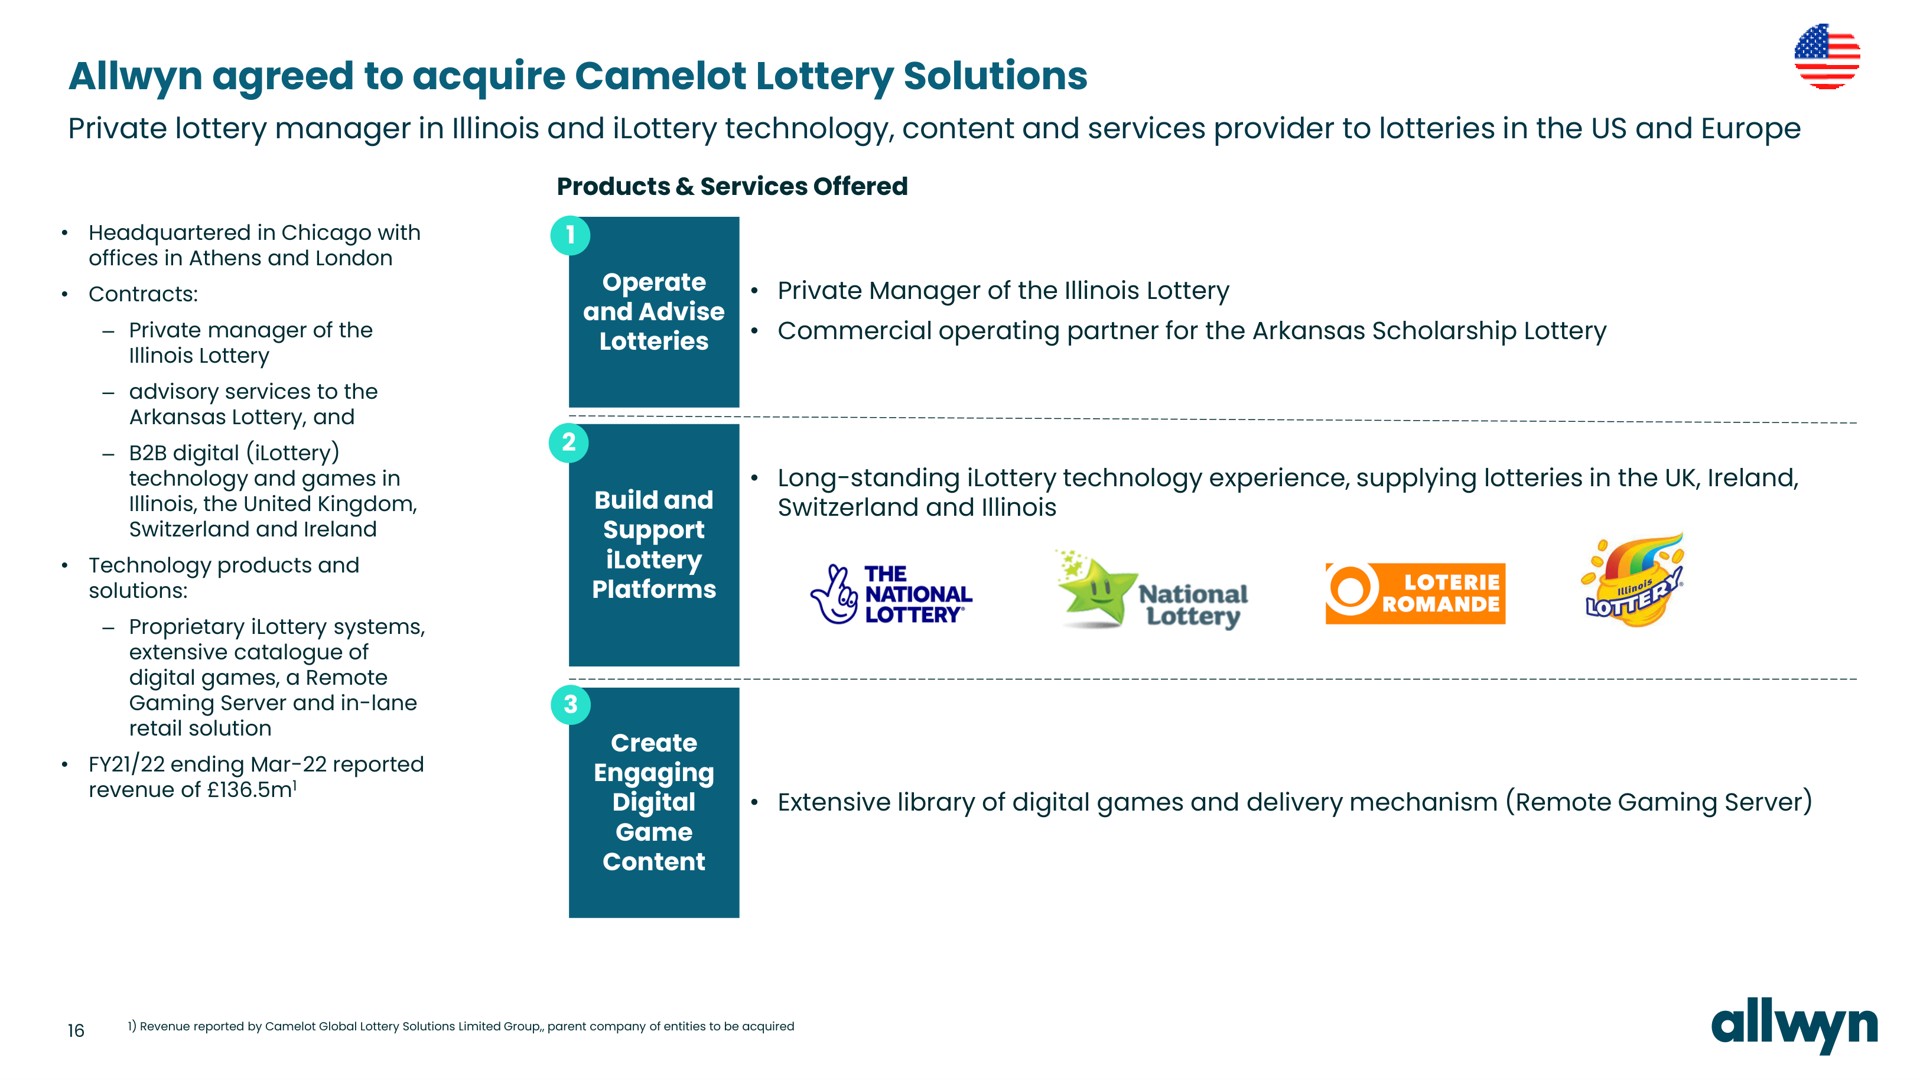 agreed to acquire lottery solutions | Allwyn